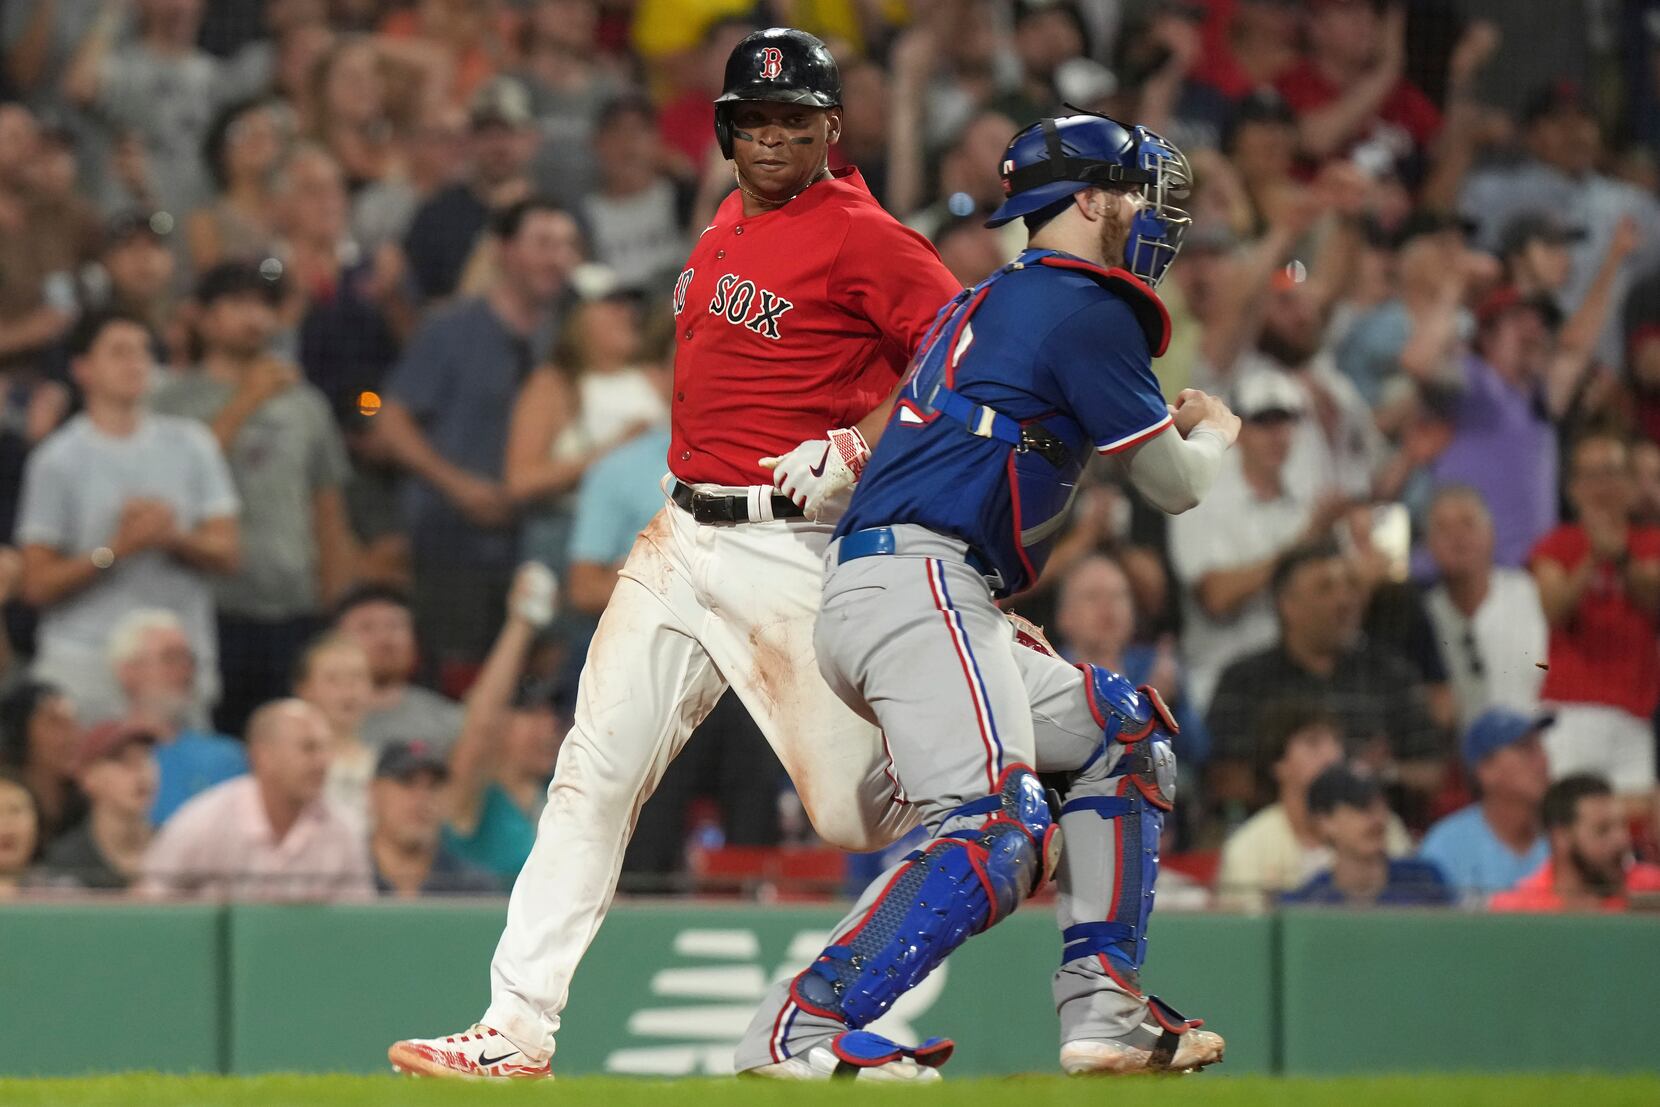 Devers extends hit streak to 8, Red Sox beat Indians